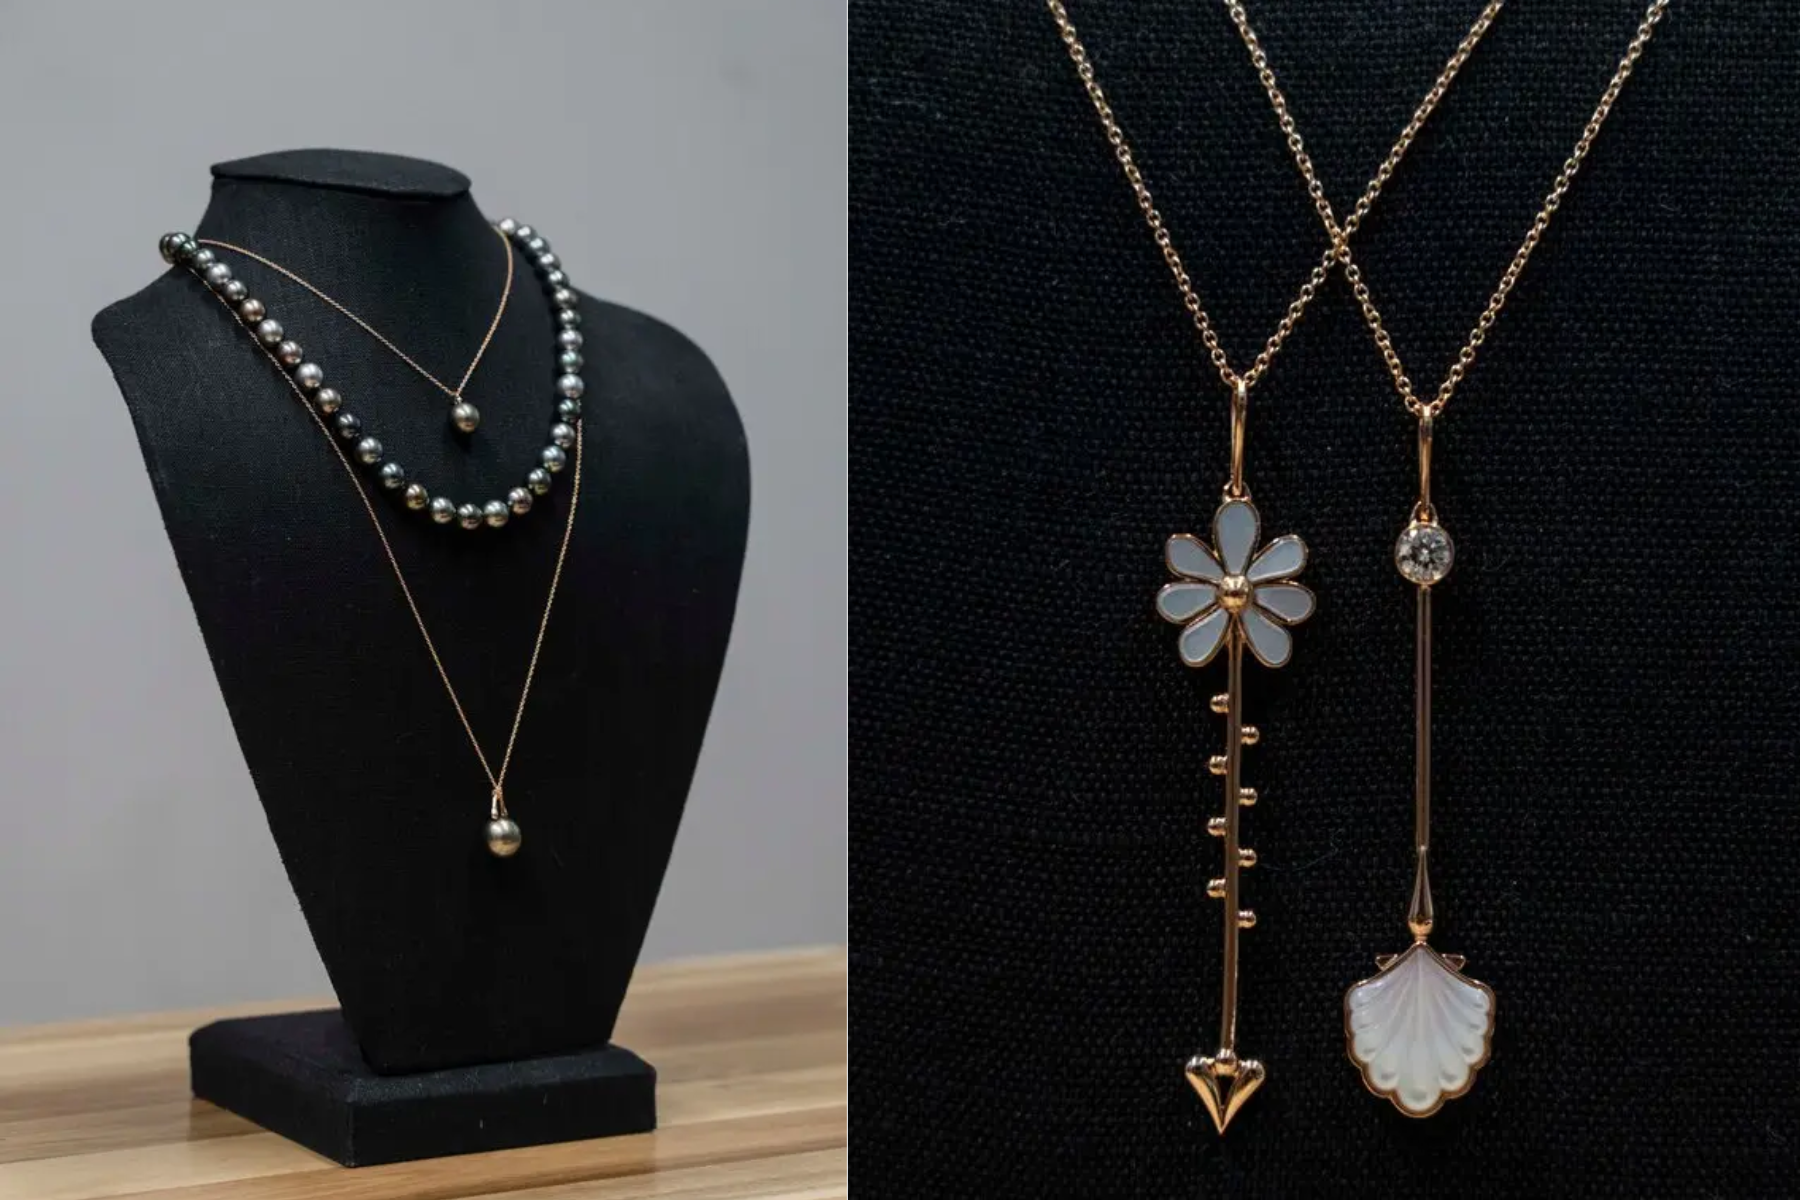 The Tahitian pearl necklaces and 18k gold necklaces, the Bloom Wand, left, and Water Wand